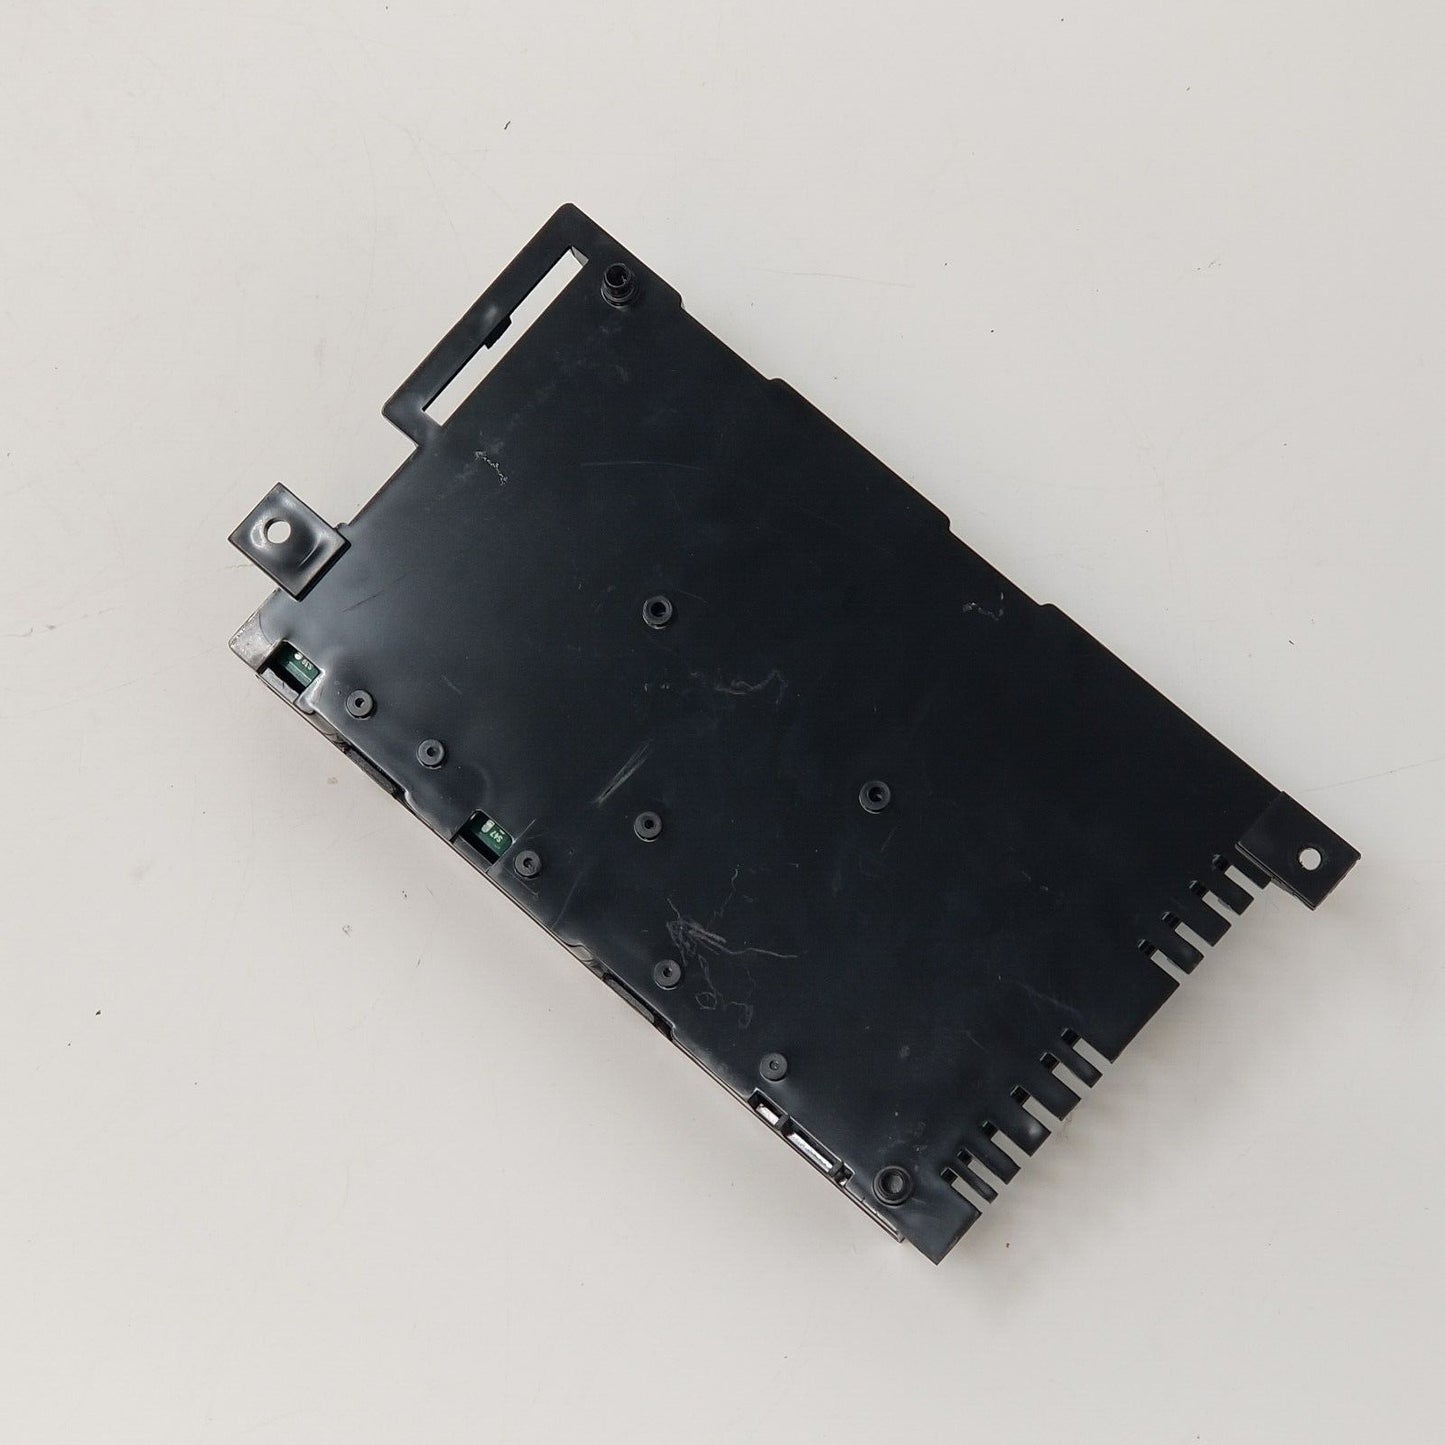 Genuine OEM Replacement for Electrolux Dryer Control 809146204